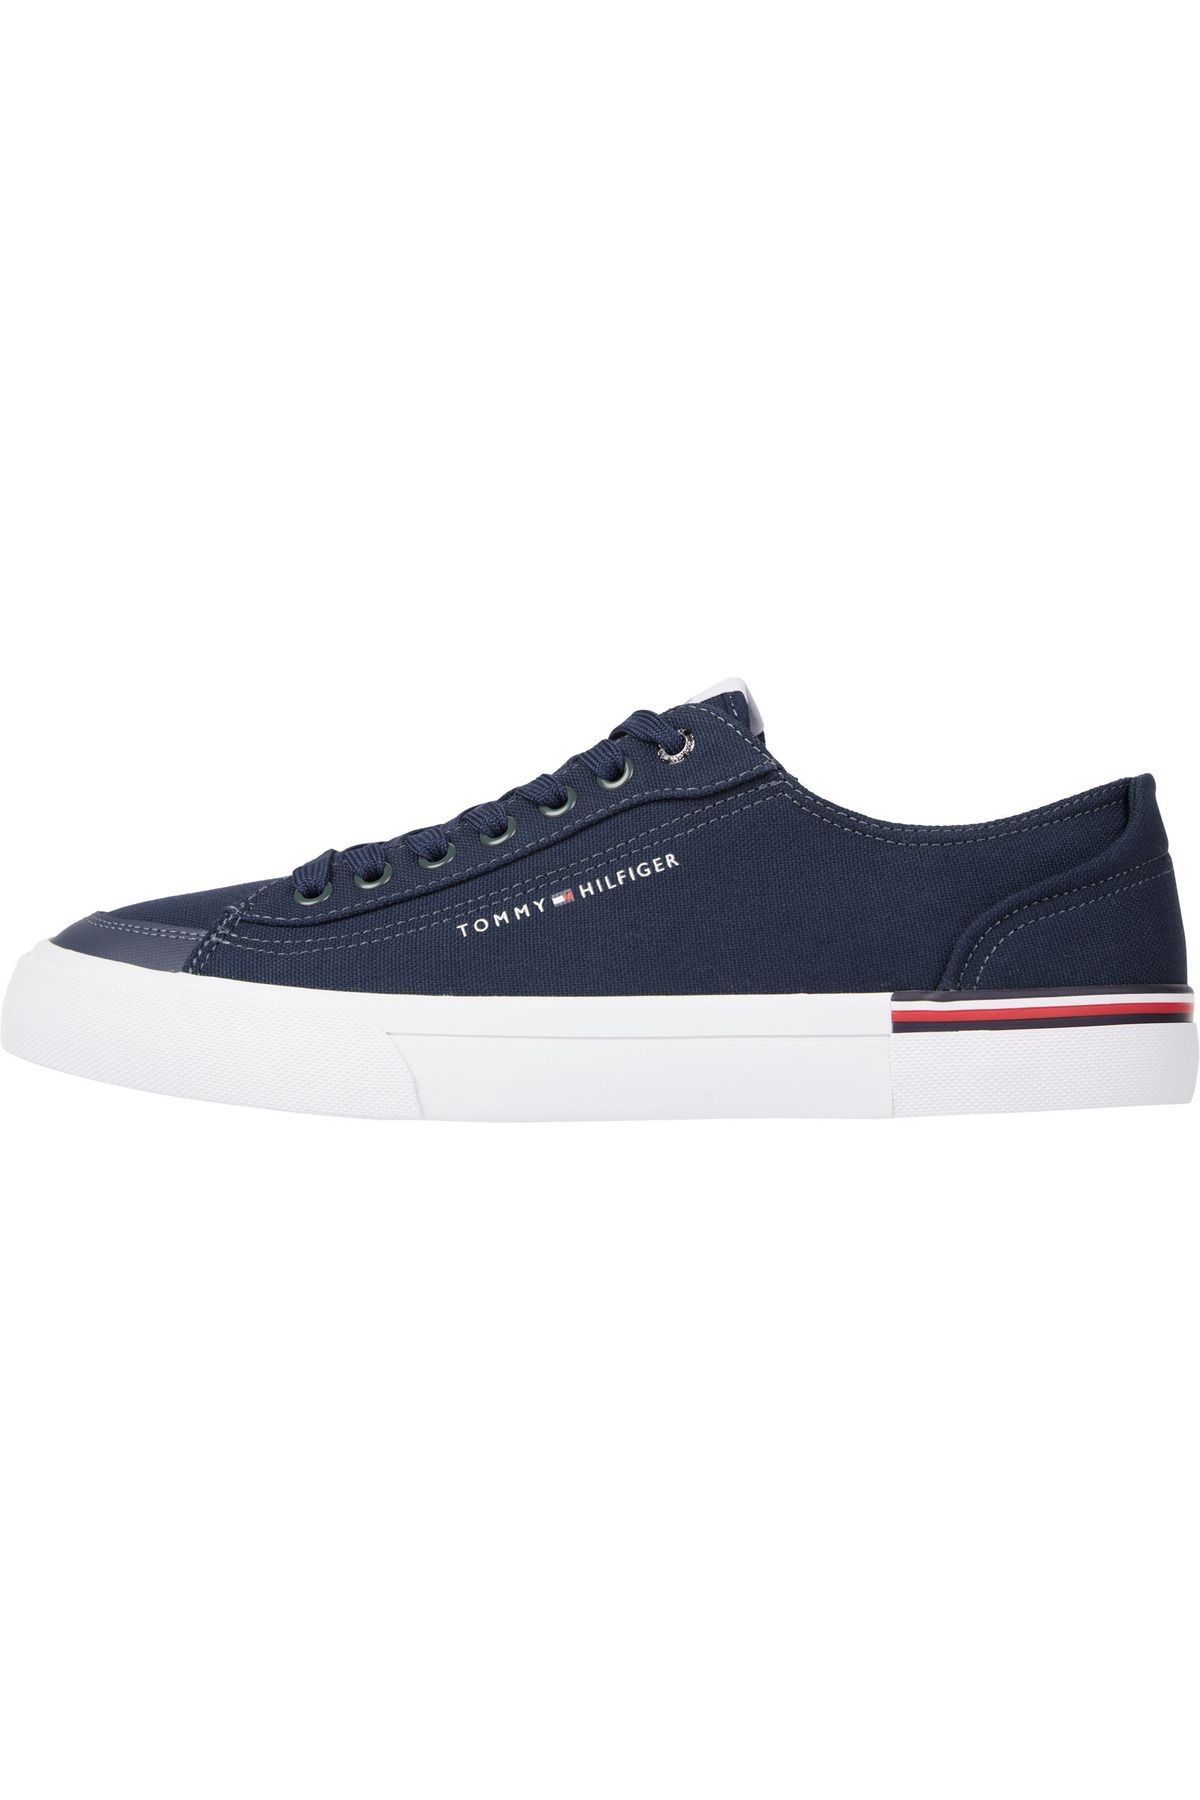 Tommy Hilfiger CORPORATE VULC CANVAS